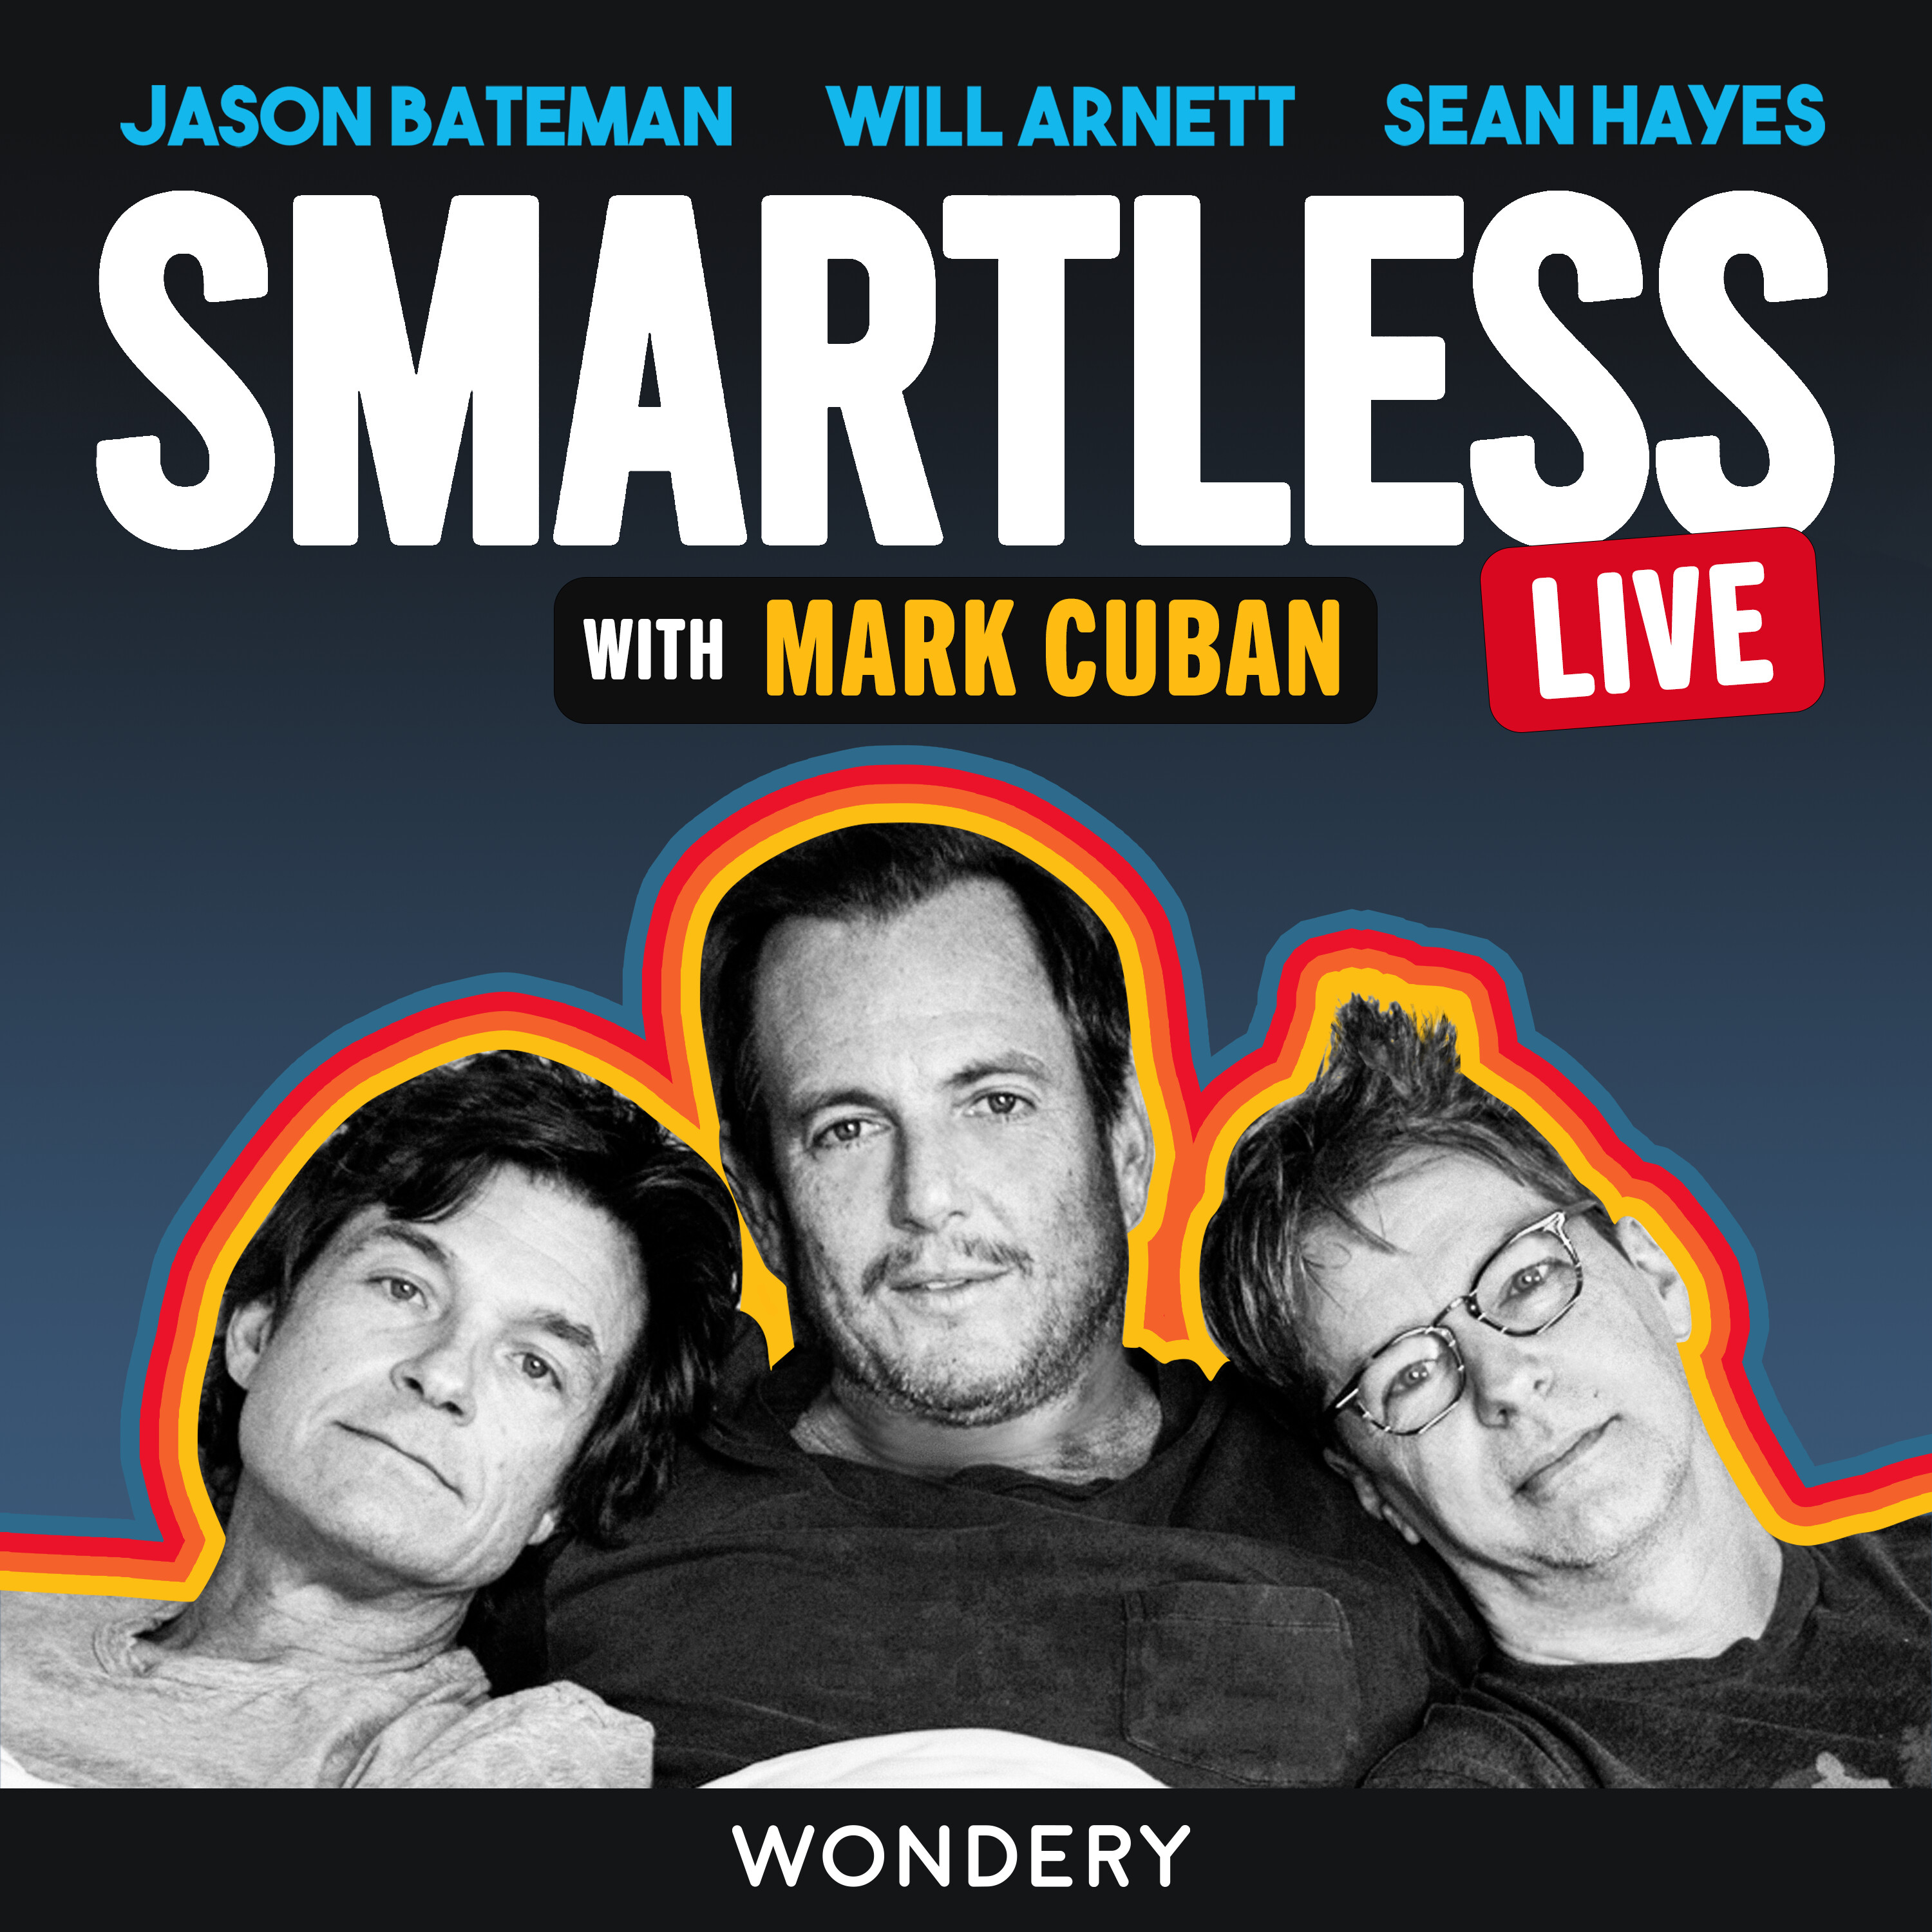 "Mark Cuban: LIVE in Chicago"